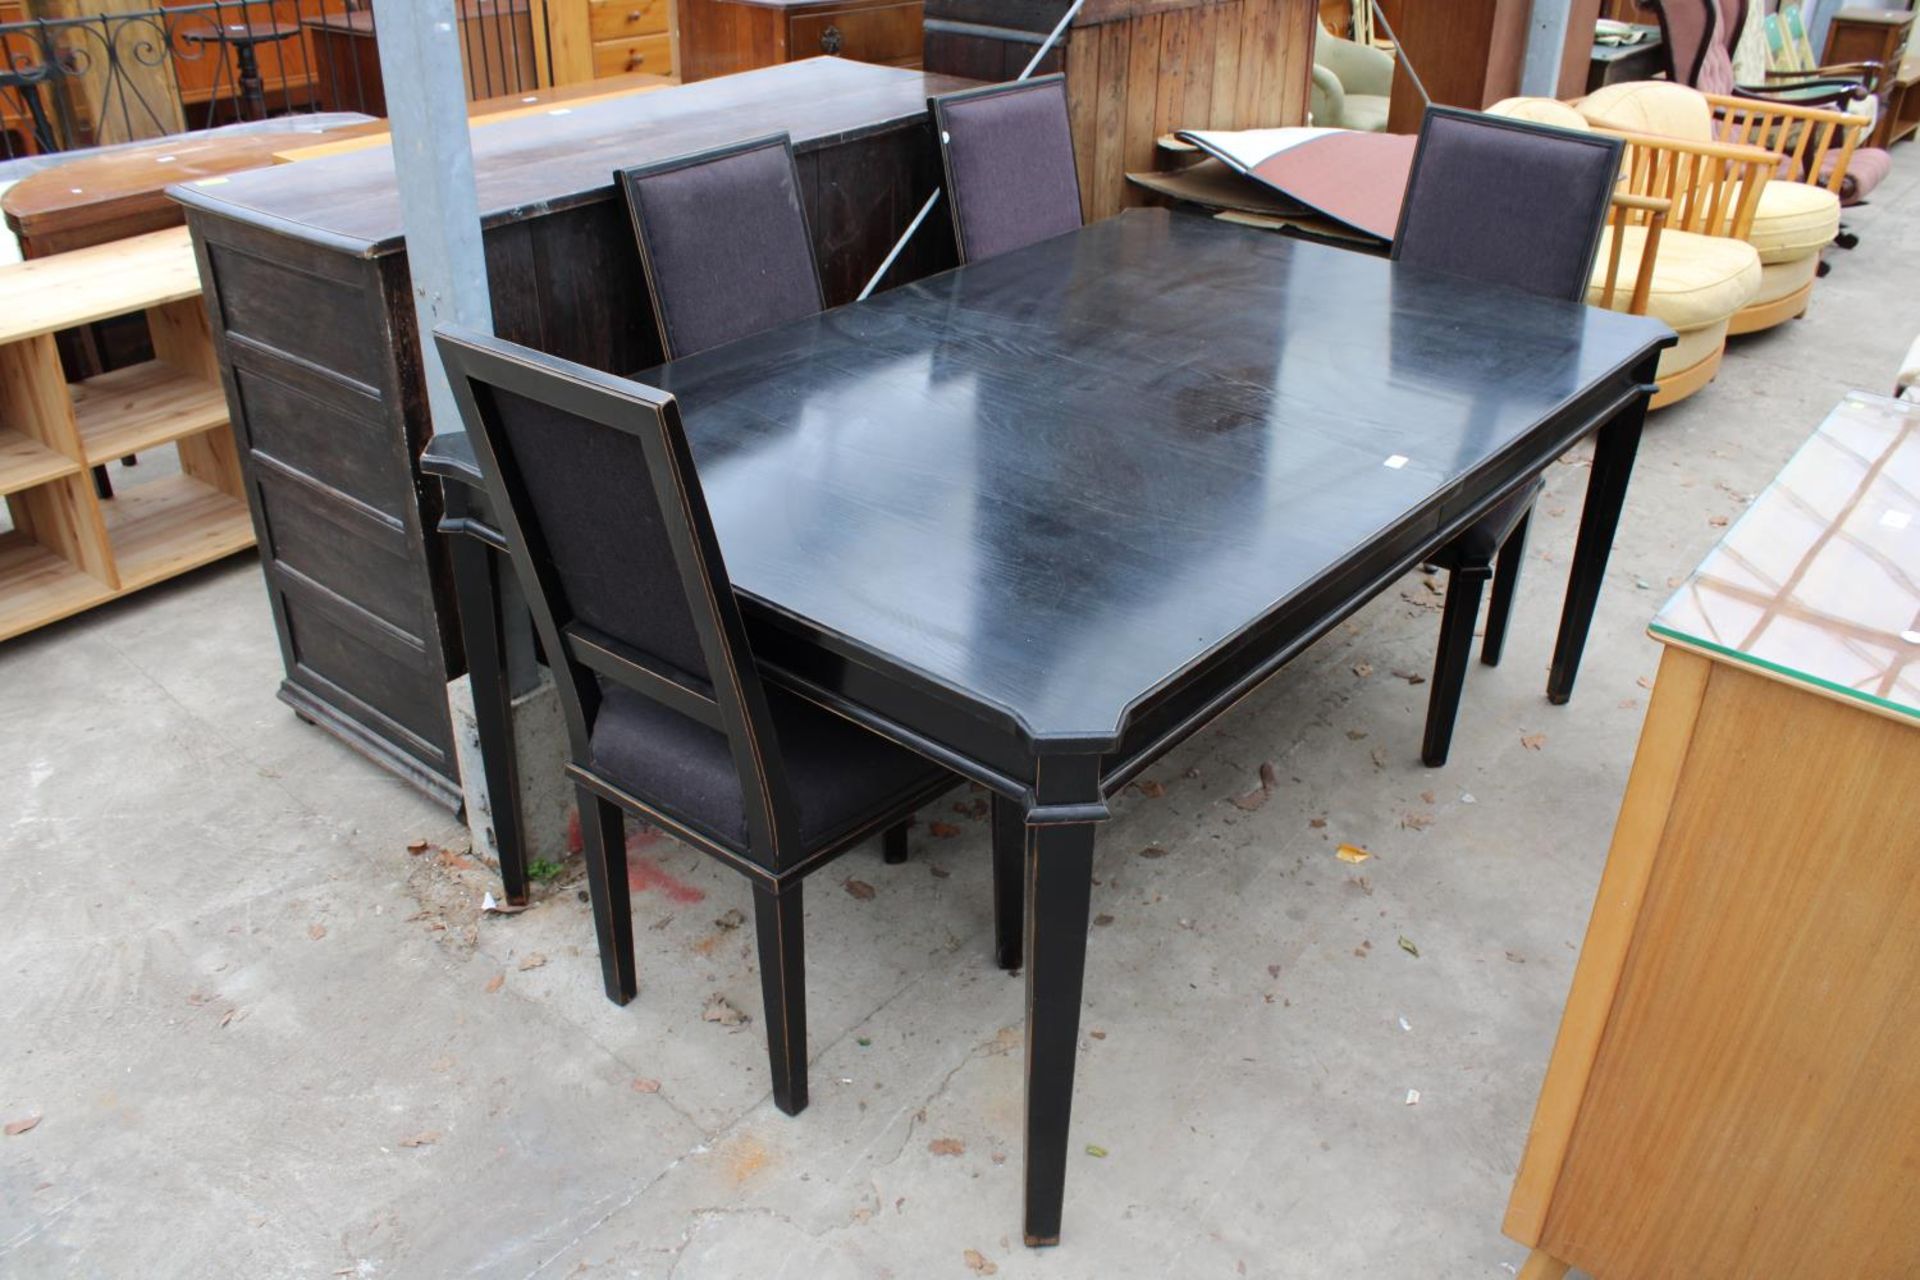 A LAURA ASHLEY HENSHAW EXTENDING DINING TABLE 69" X 45" (LEAF 19.5") AND FOUR DINING CHAIRS WITH